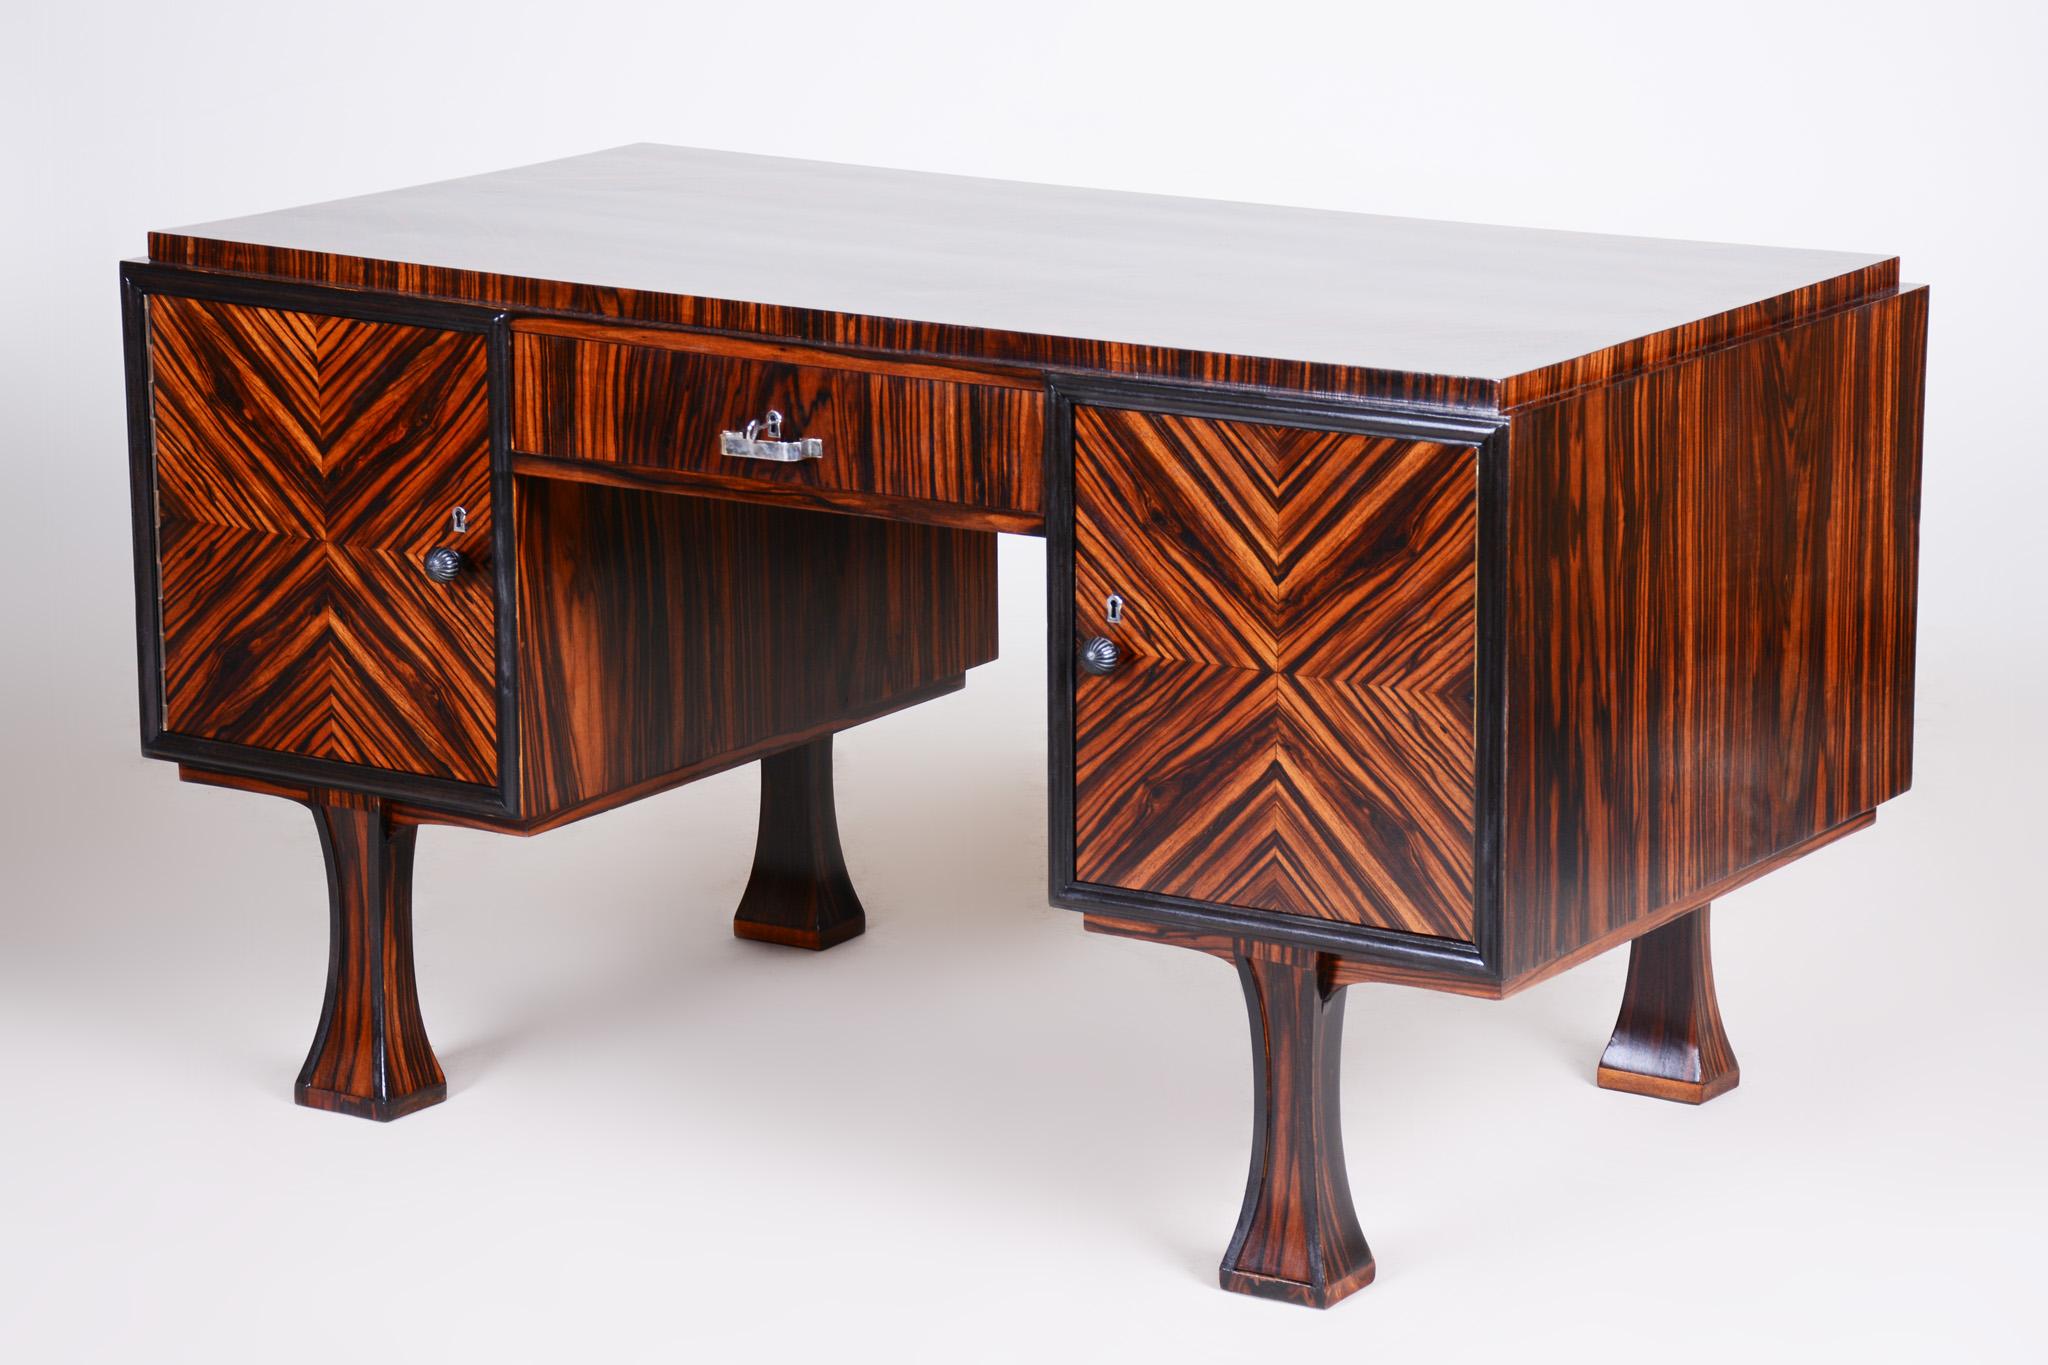 French Art Deco Writing Desk Made in the 1920s, Restored Ebony 1